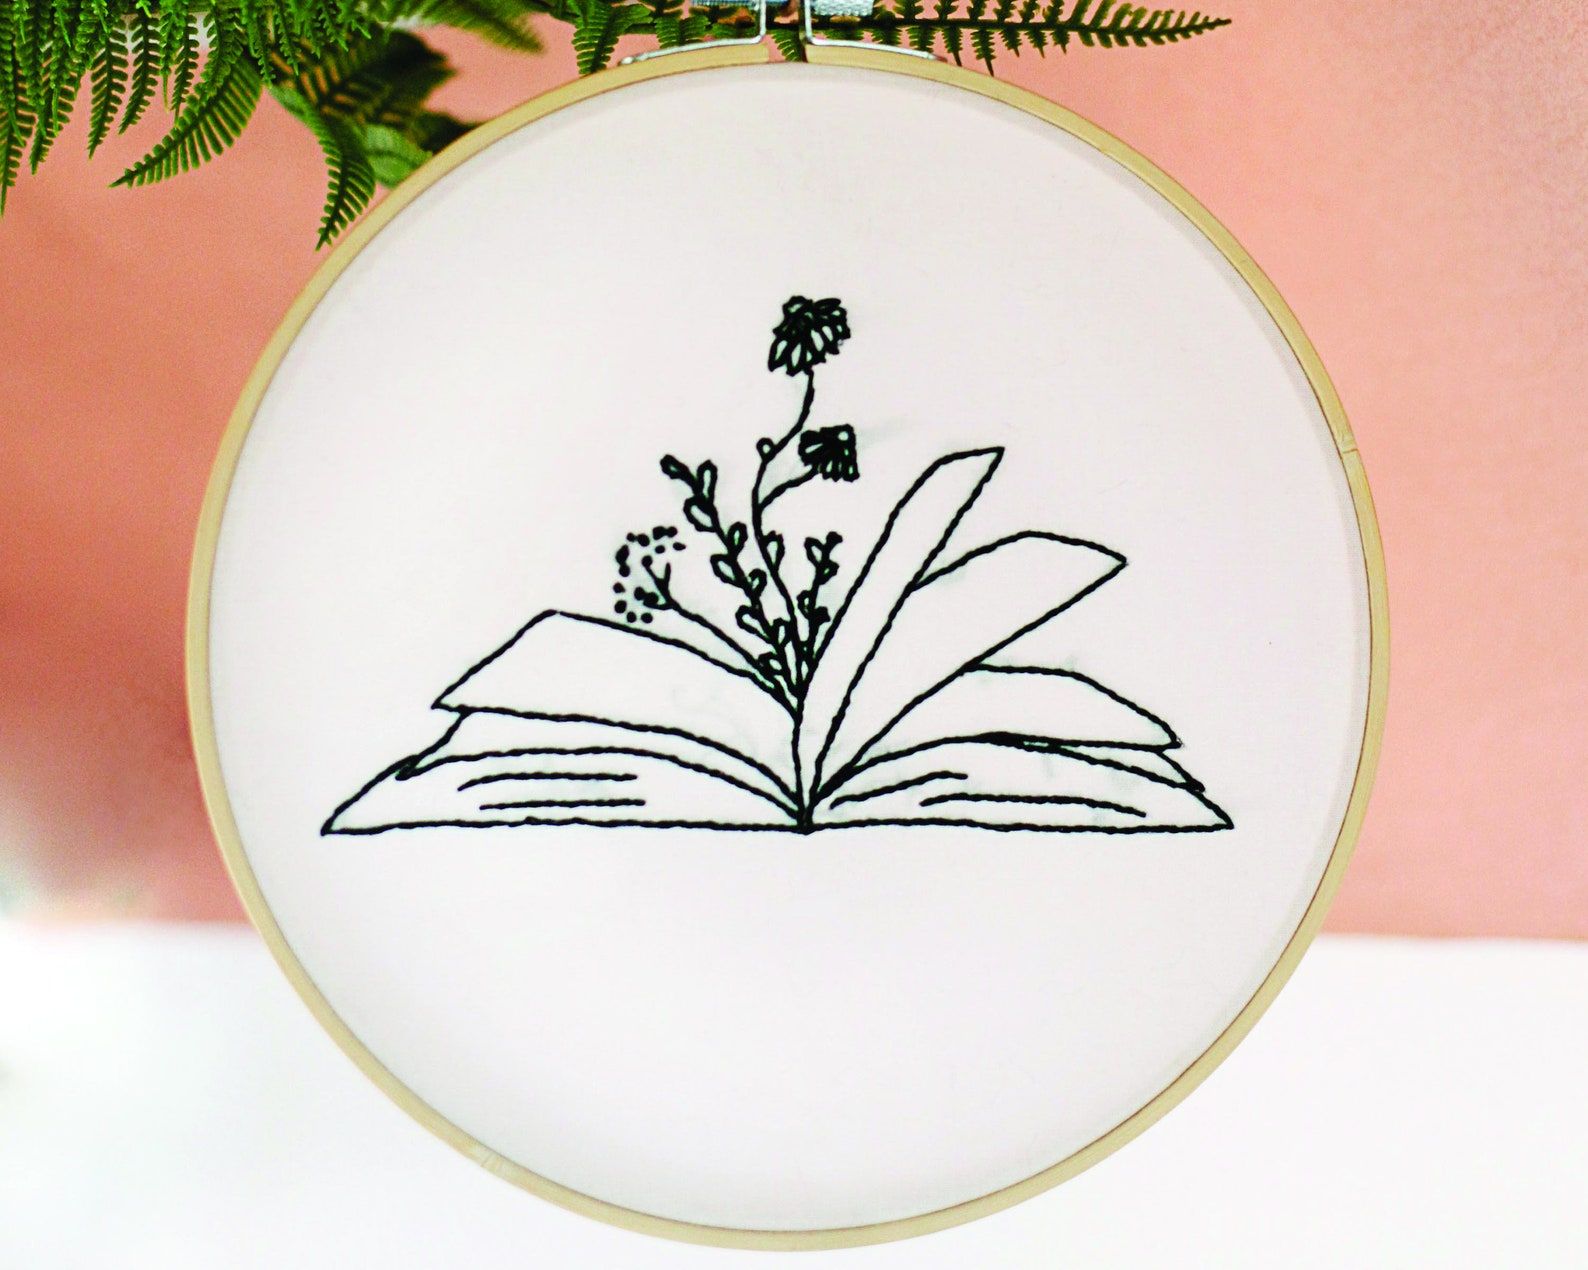 Image of an embroidery hoop. The design is of an open book with flowers growing out of it. 